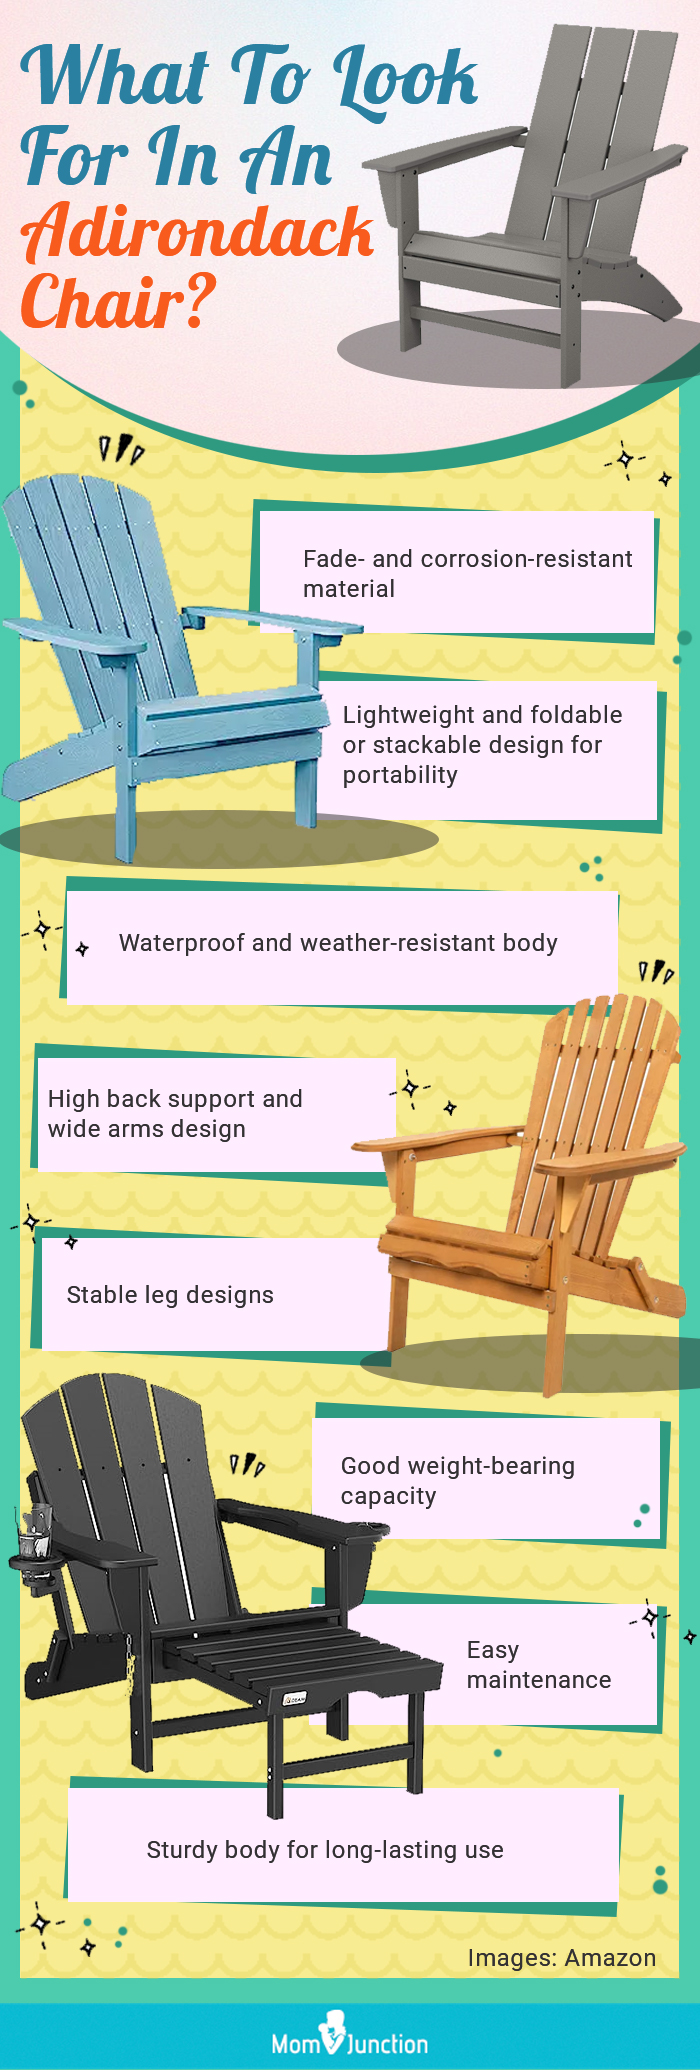 What To Look For In An Adirondack Chair (infographic)